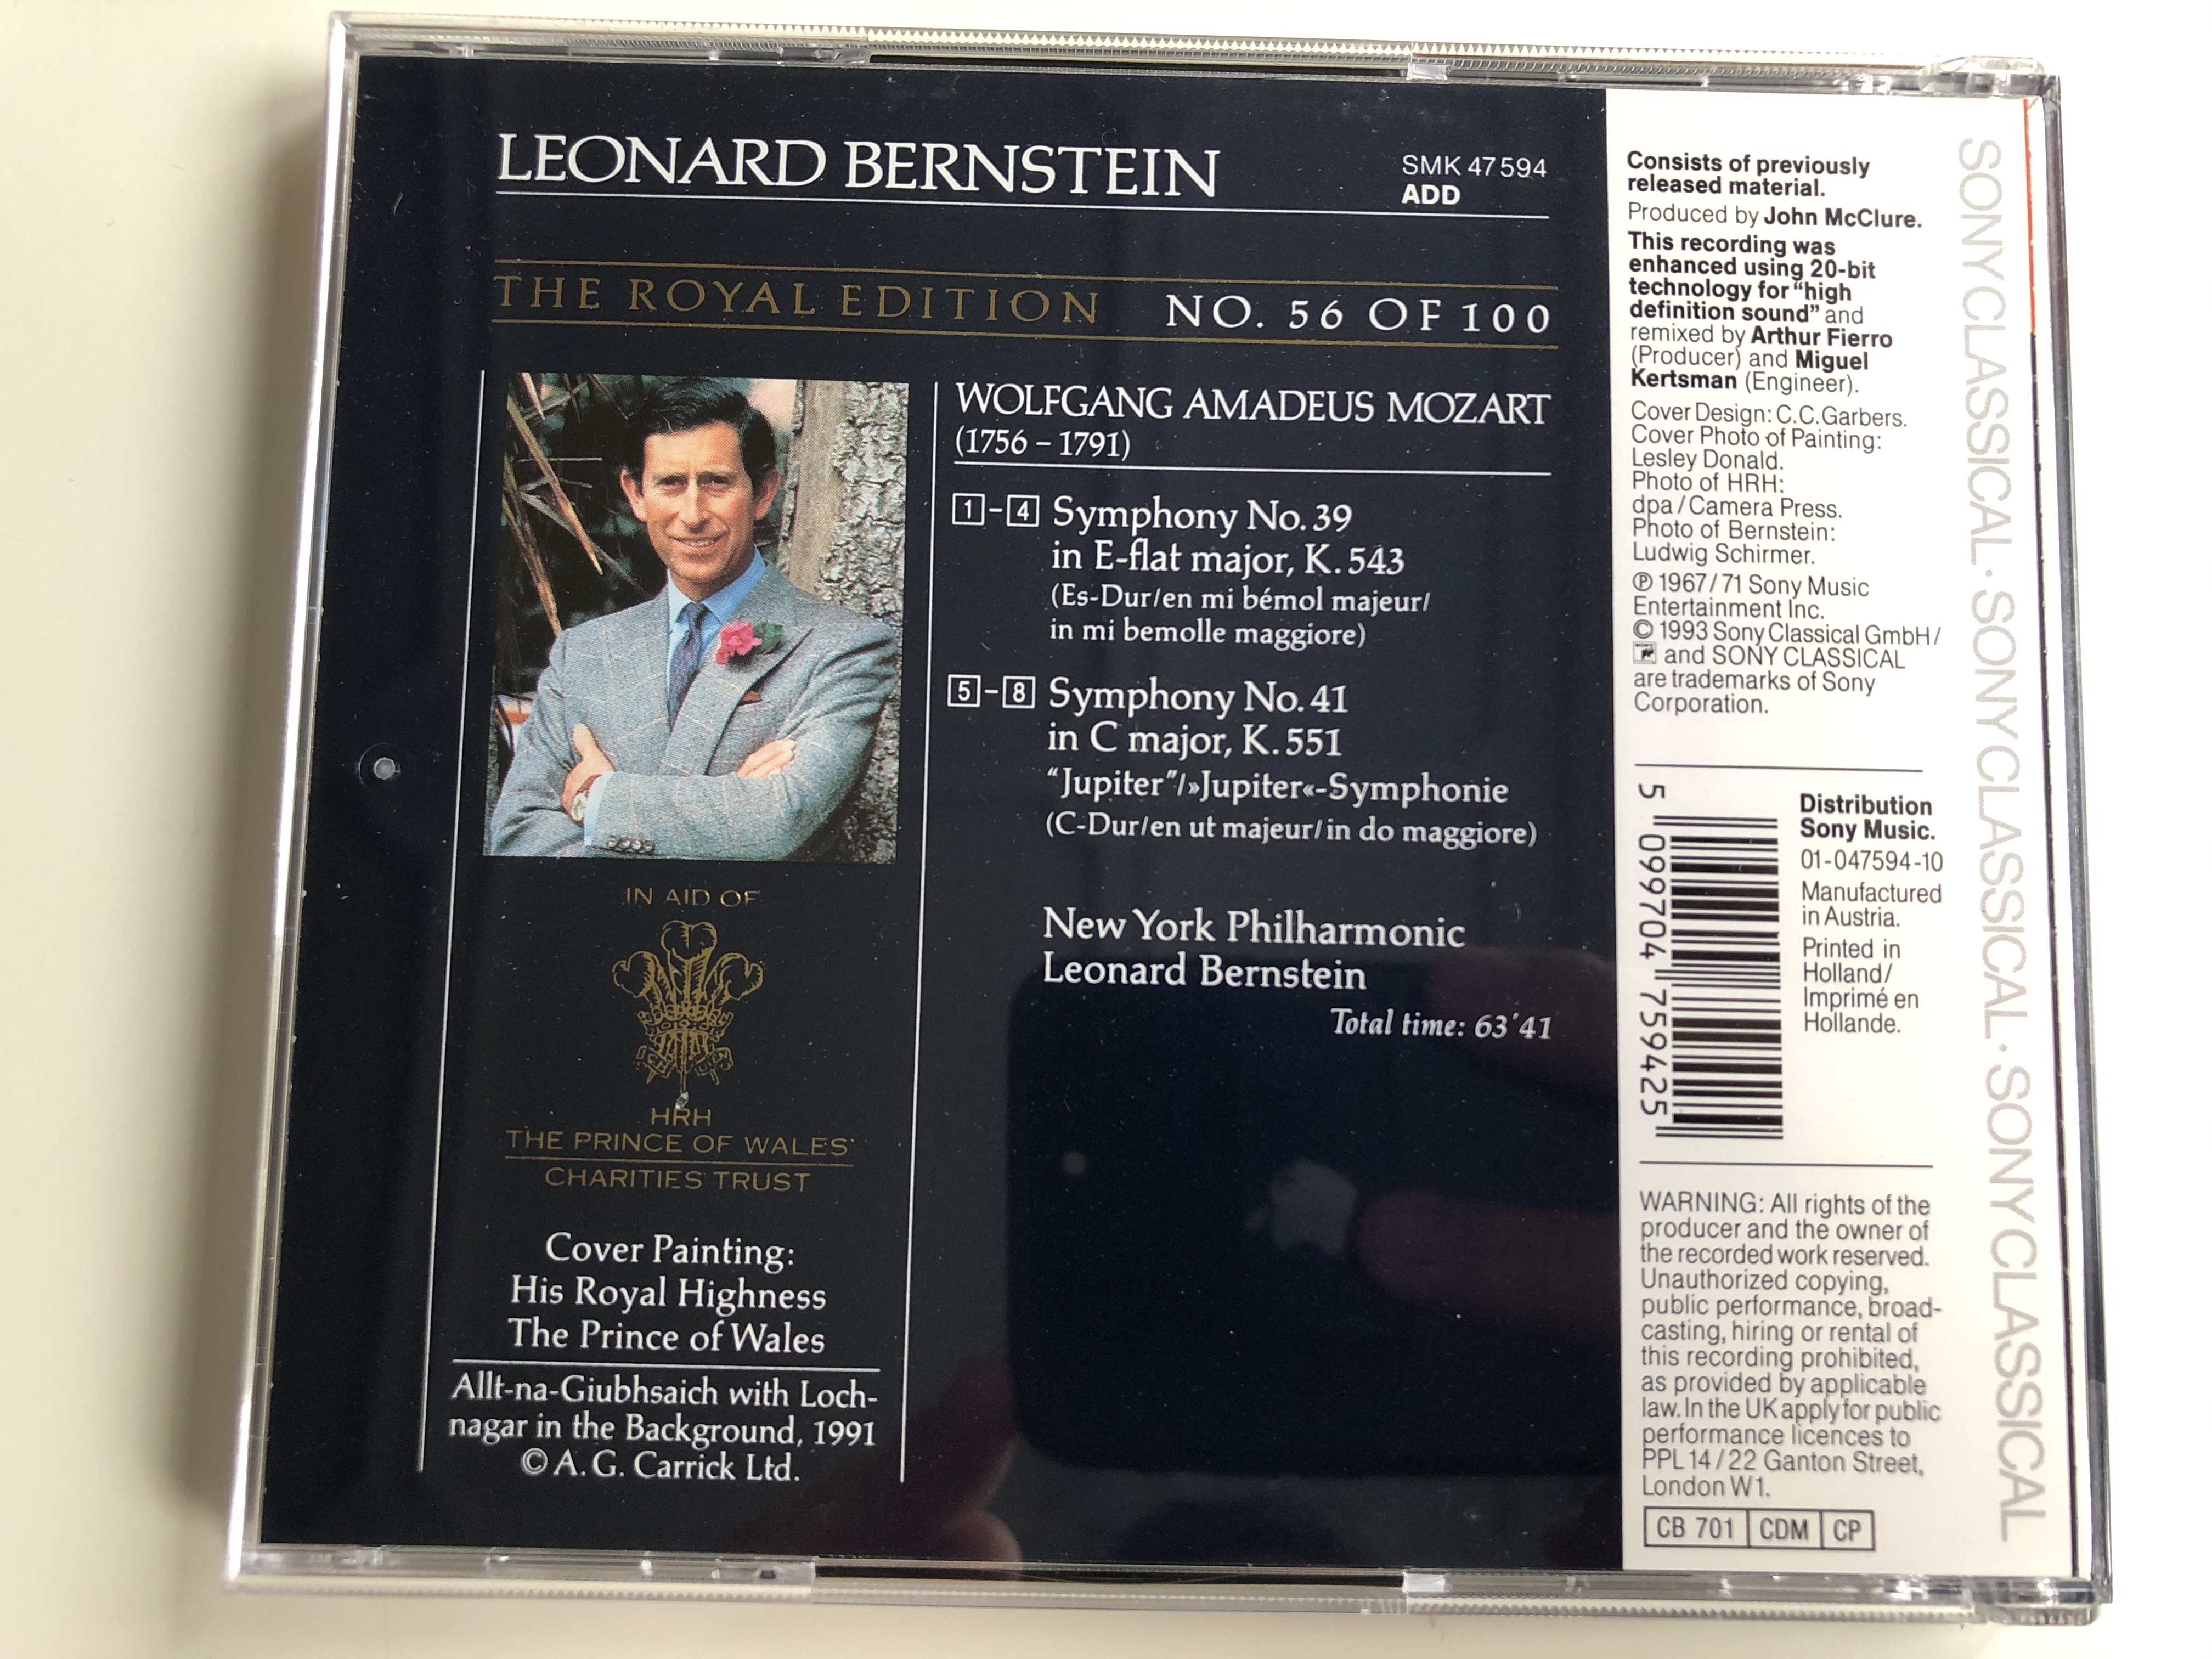 leonard-bernstein-mozart-symphony-no.39-symphony-no.41-jupiter-new-york-philharmonic-the-royal-edition-painting-by-h.r.h.-the-prince-of-wales-no.-56-of-100-hrh-sony-classical-audio-cd-19-7-.jpg